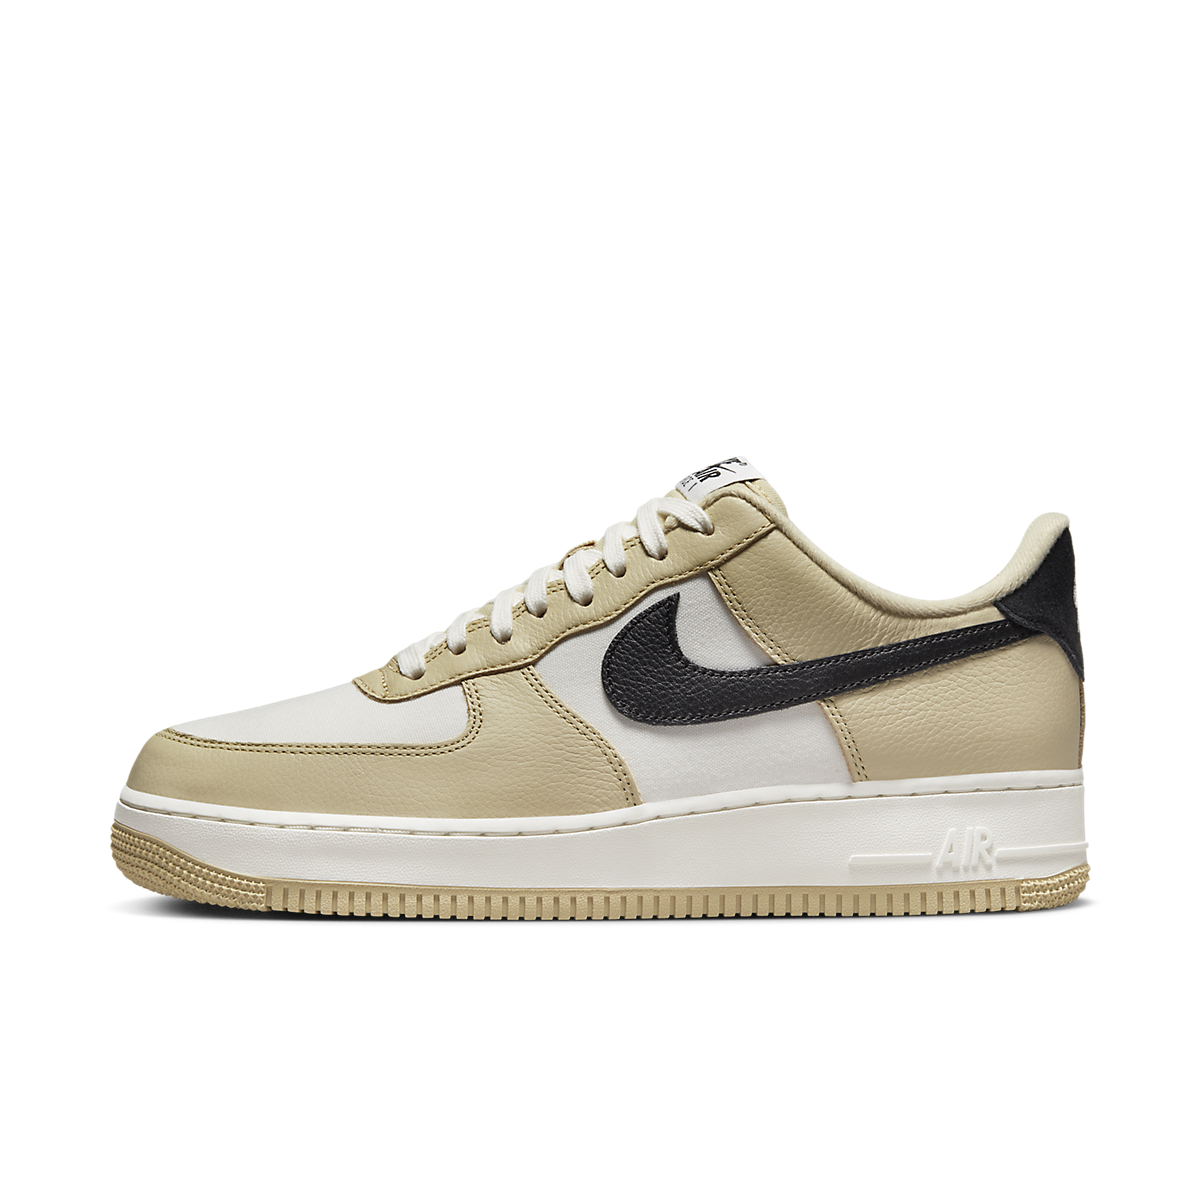 Nike Air Force 1 '07 LX Low 'Team Gold'